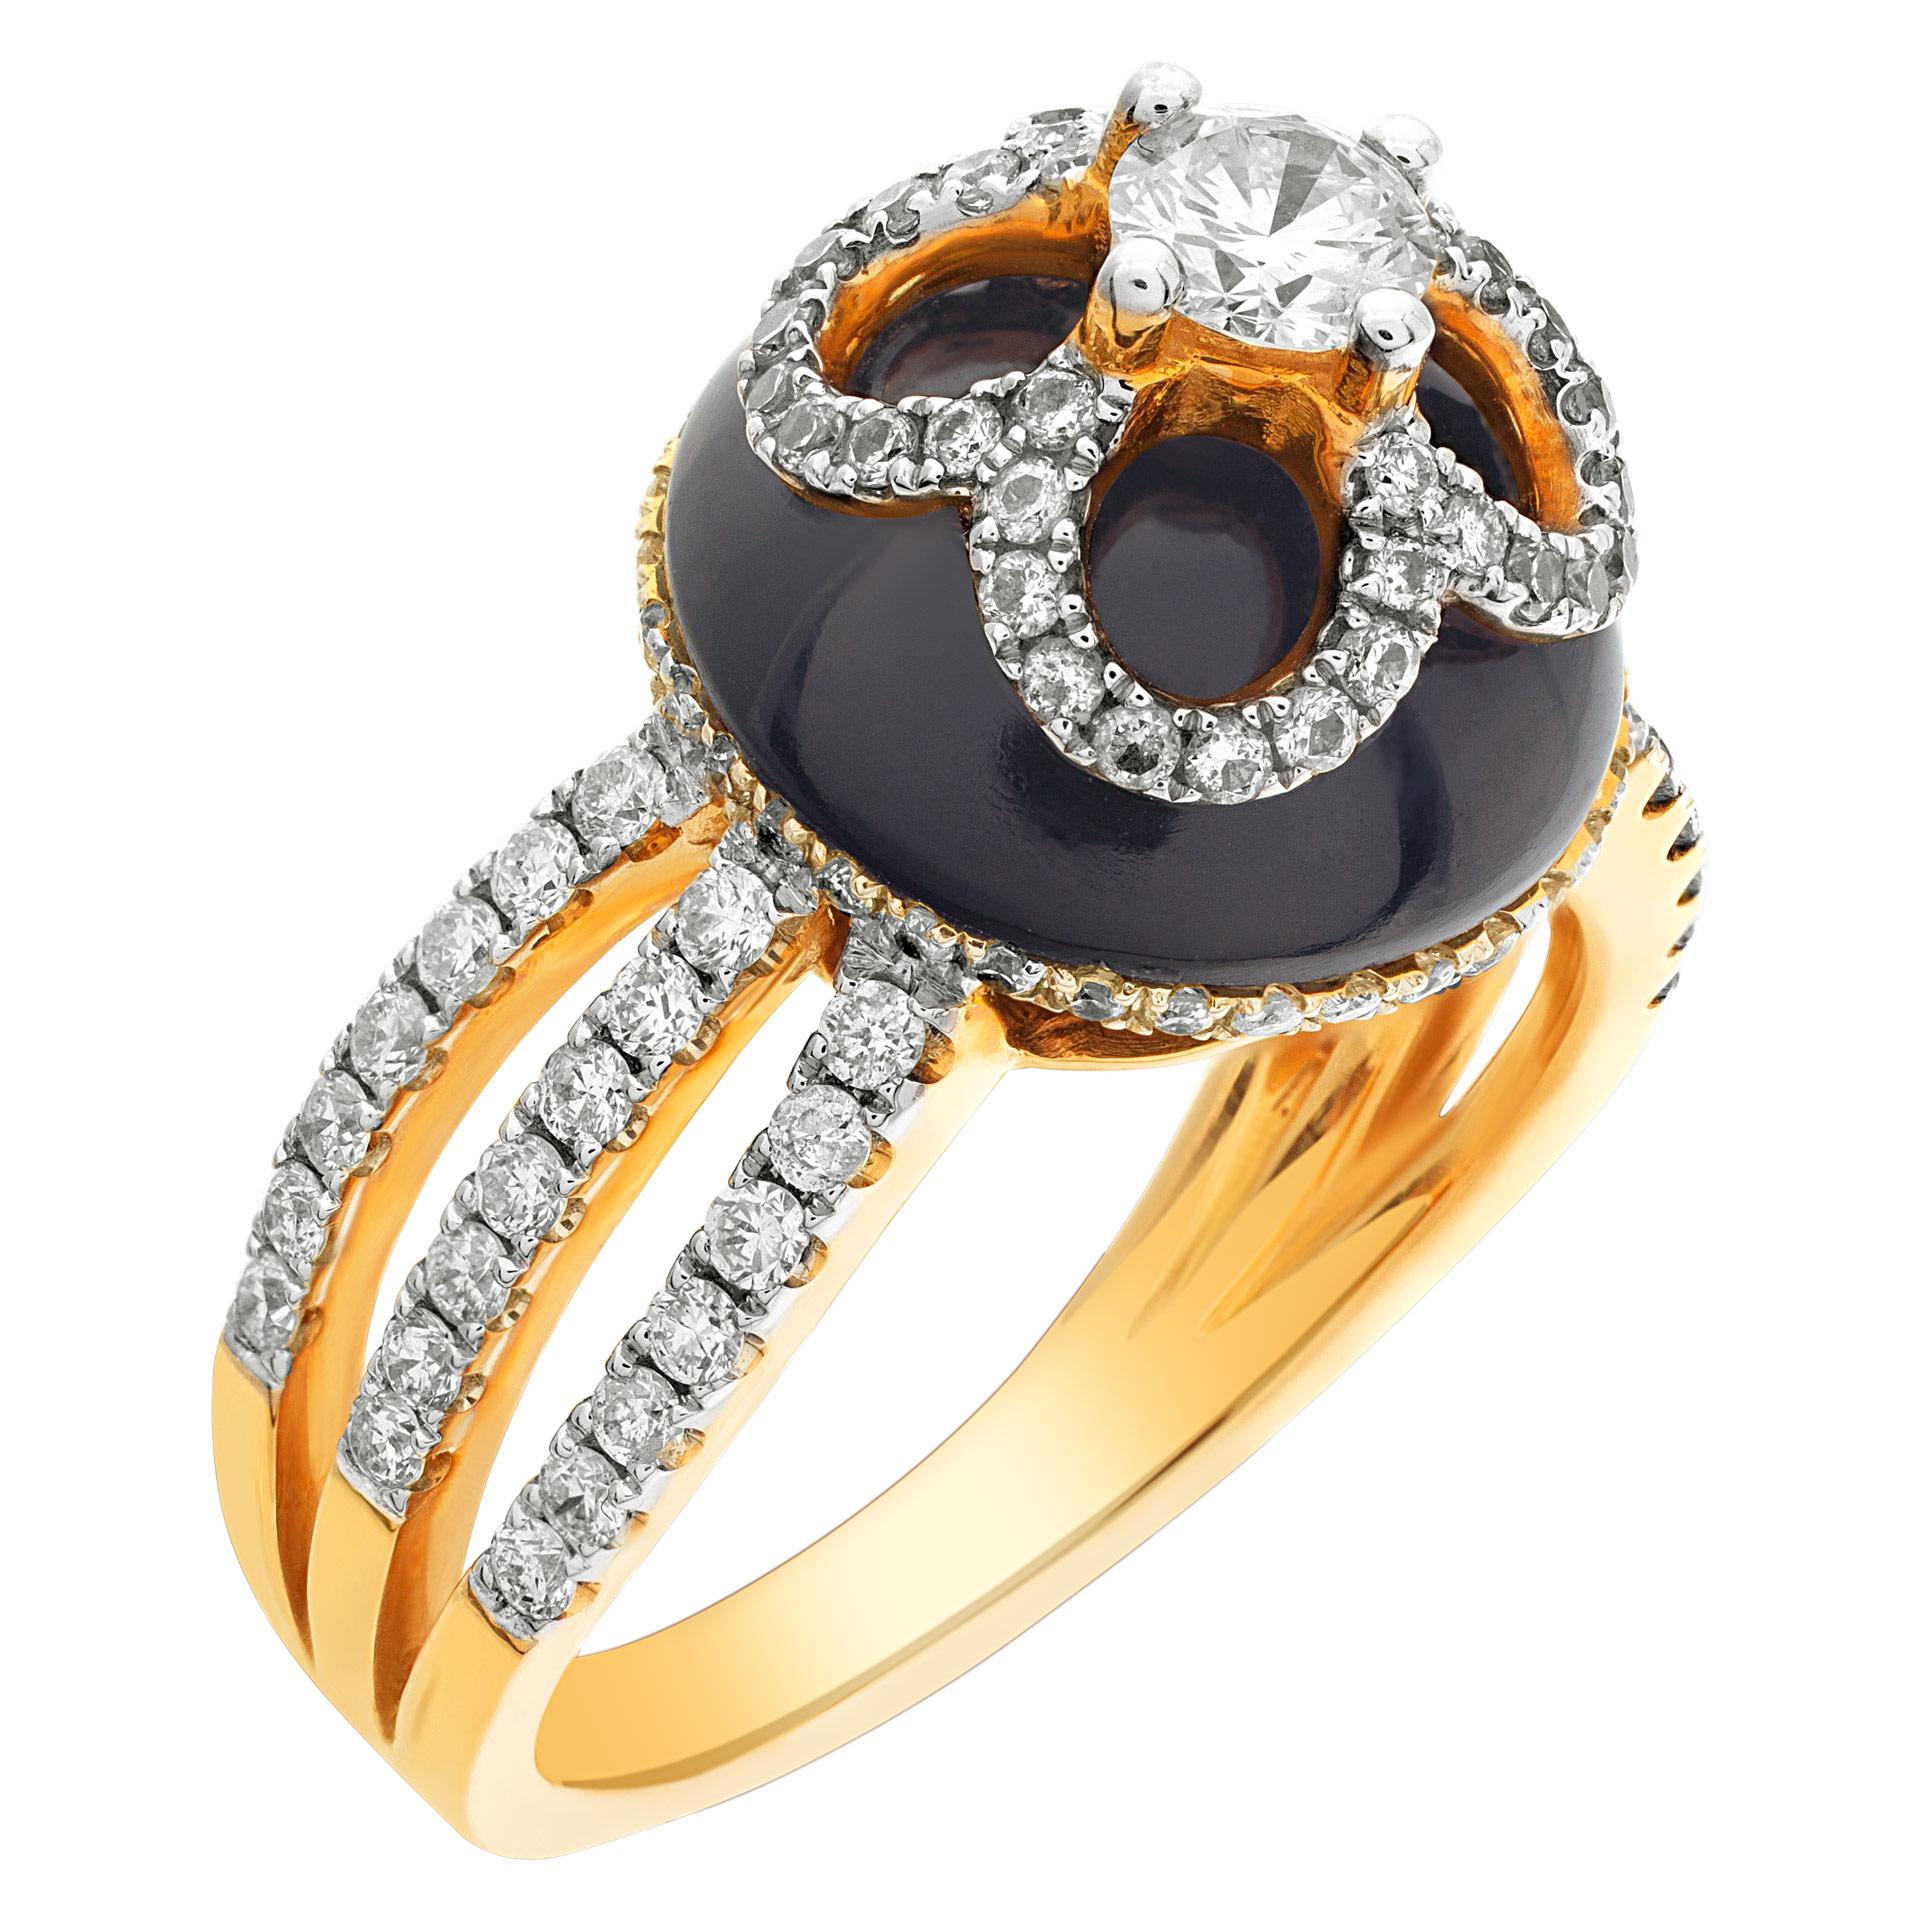 Designer Michael Christoff diamonds ring set in 18k rose gold. The top of the ring gives a spidery effect on a black agate. Diamond center  approx 0.24 carat. All around 112 diamonds, total approximative weight: 0.74 carat.  All round diamonds are